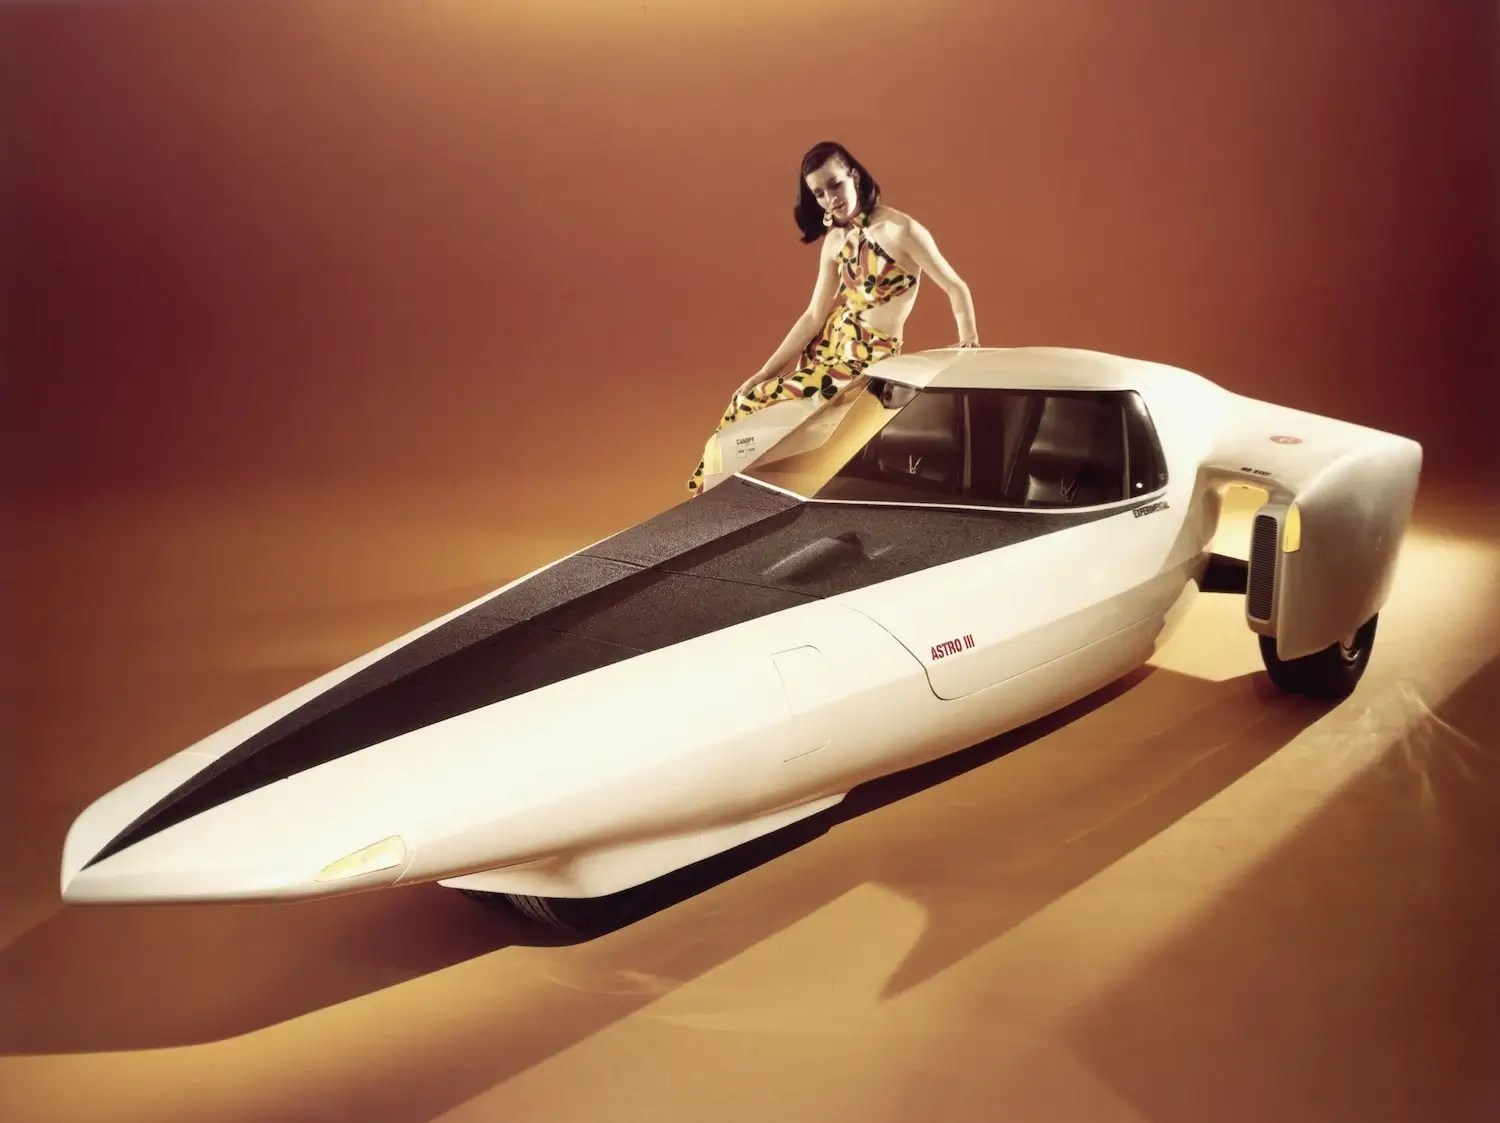 A model sits on the fender of a futuristic, rocket-shaped 1969 Chevrolet prototype at an auto show.